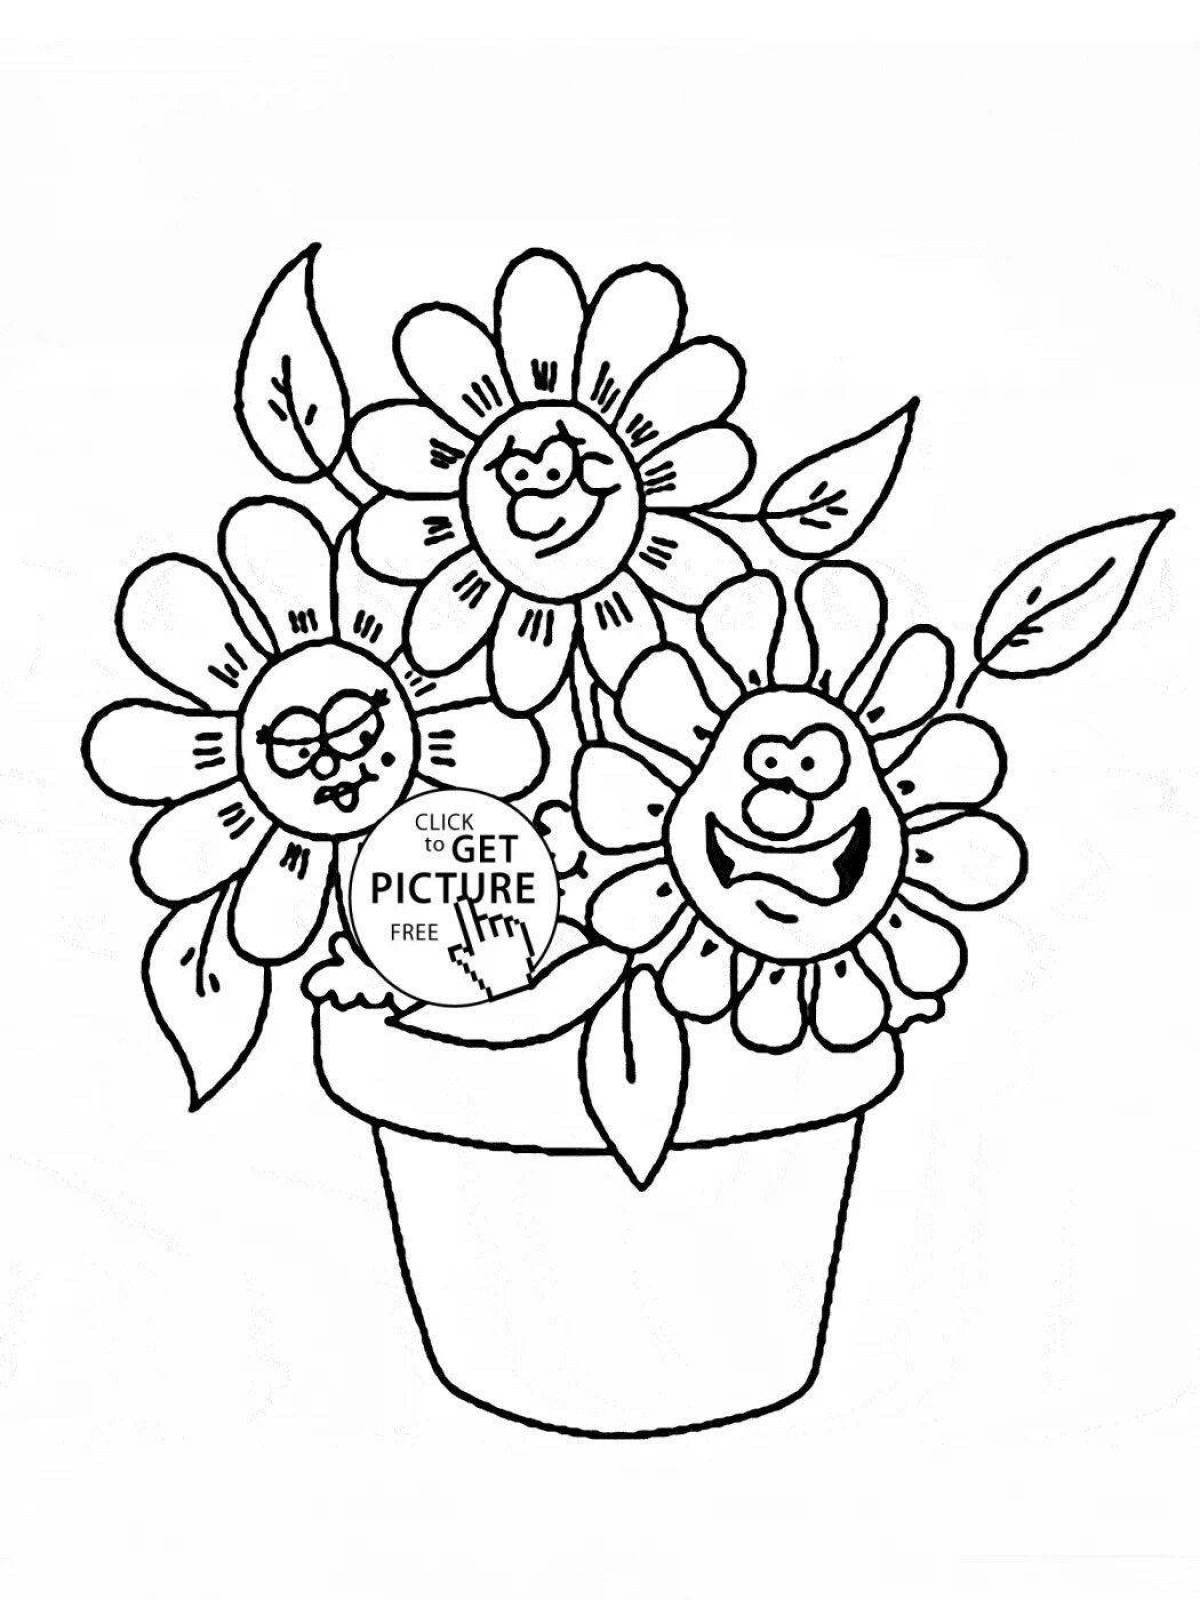 Live coloring flowers for mom